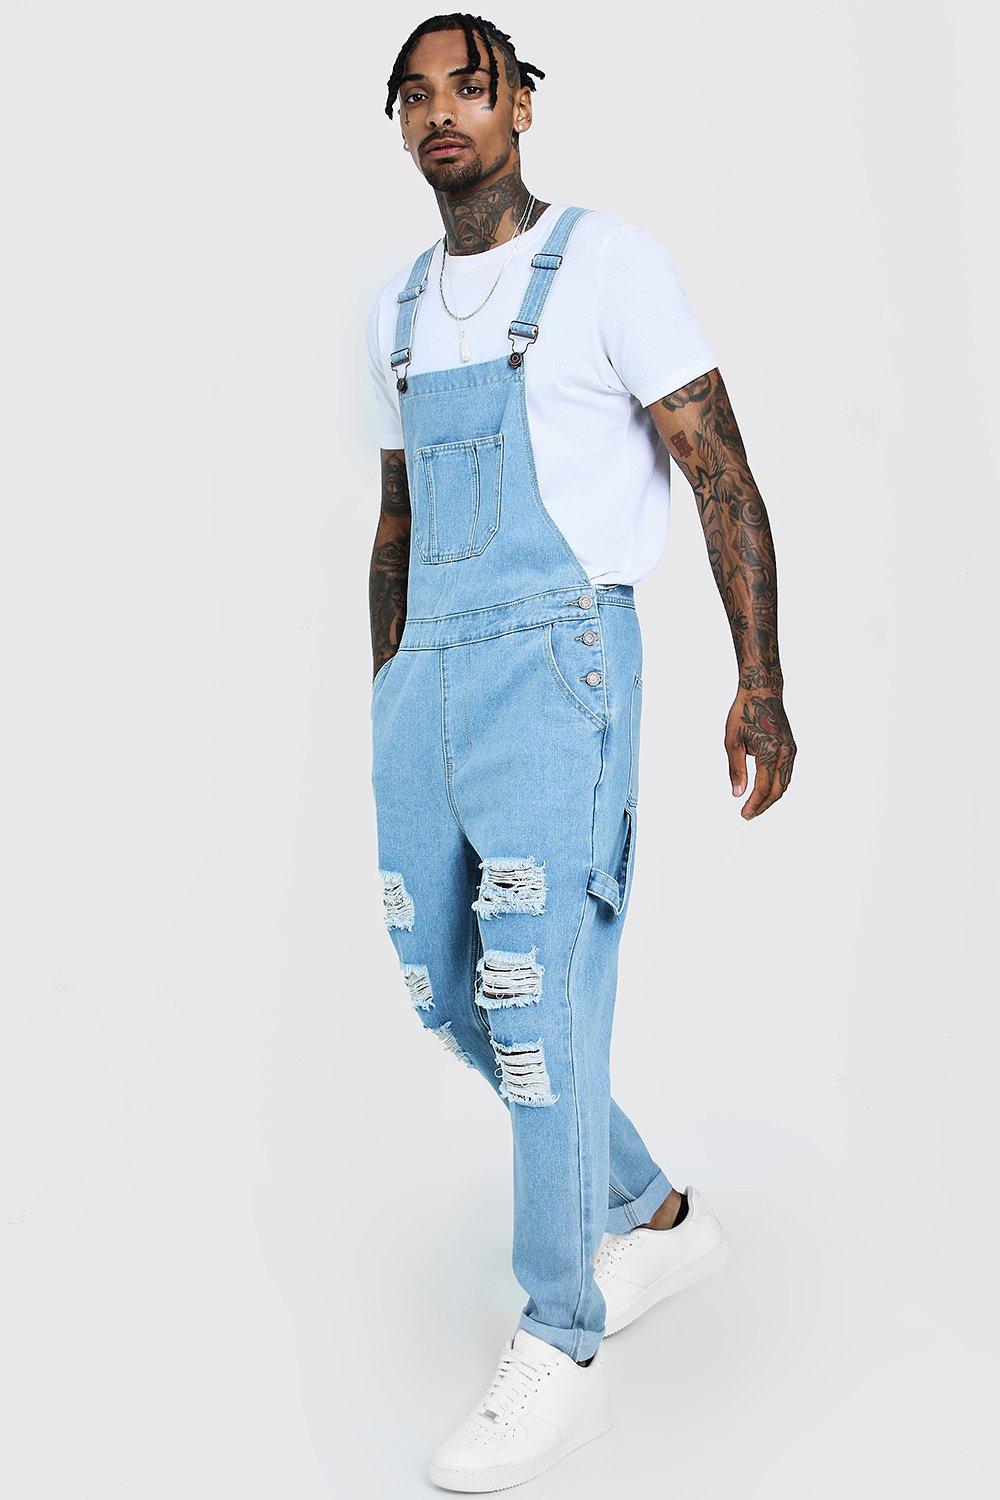 blue skinny dungarees